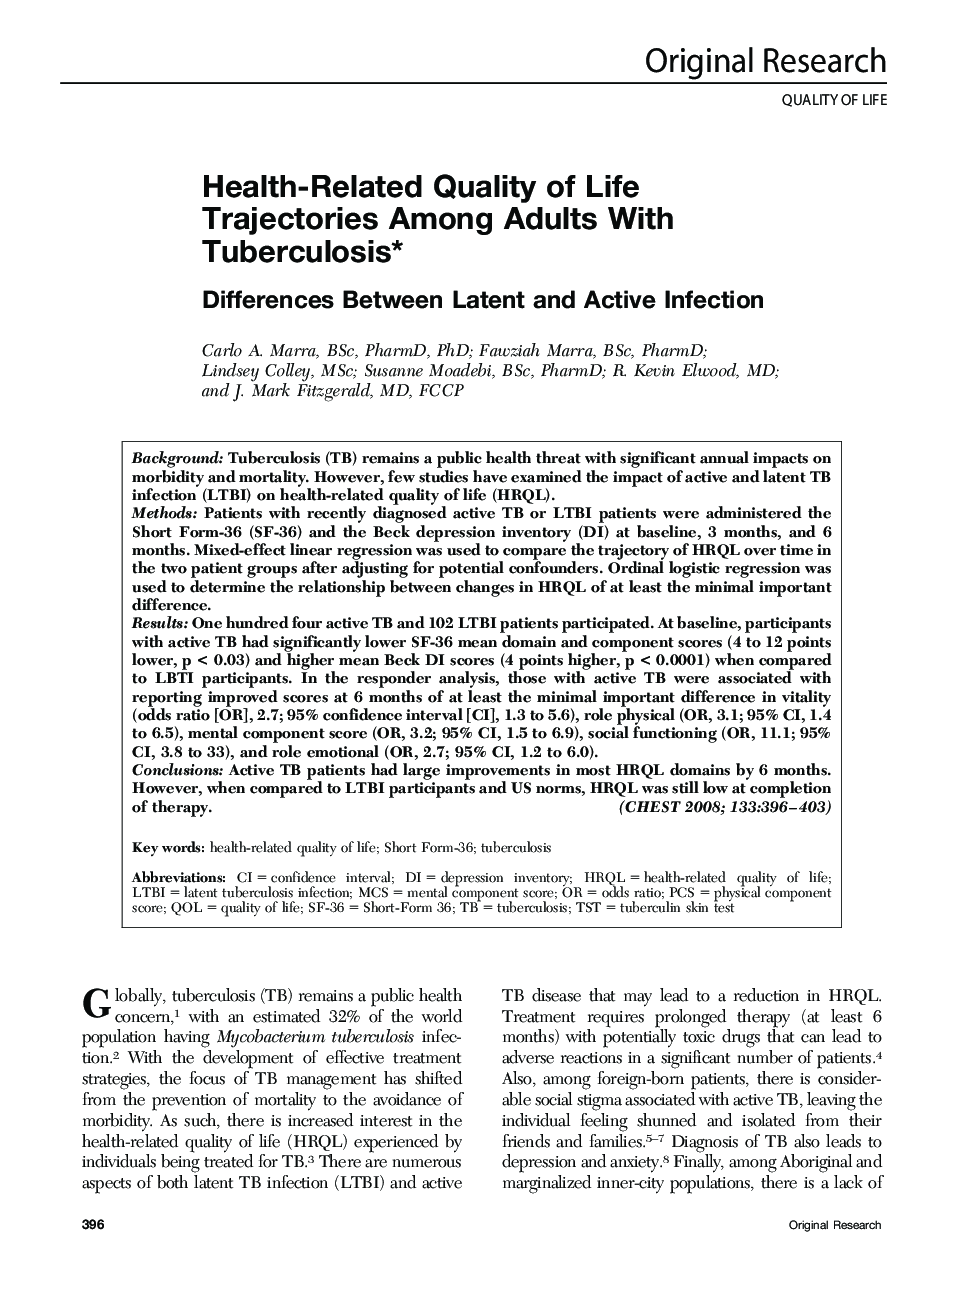 Health-Related Quality of Life Trajectories Among Adults With Tuberculosis : Differences Between Latent and Active Infection